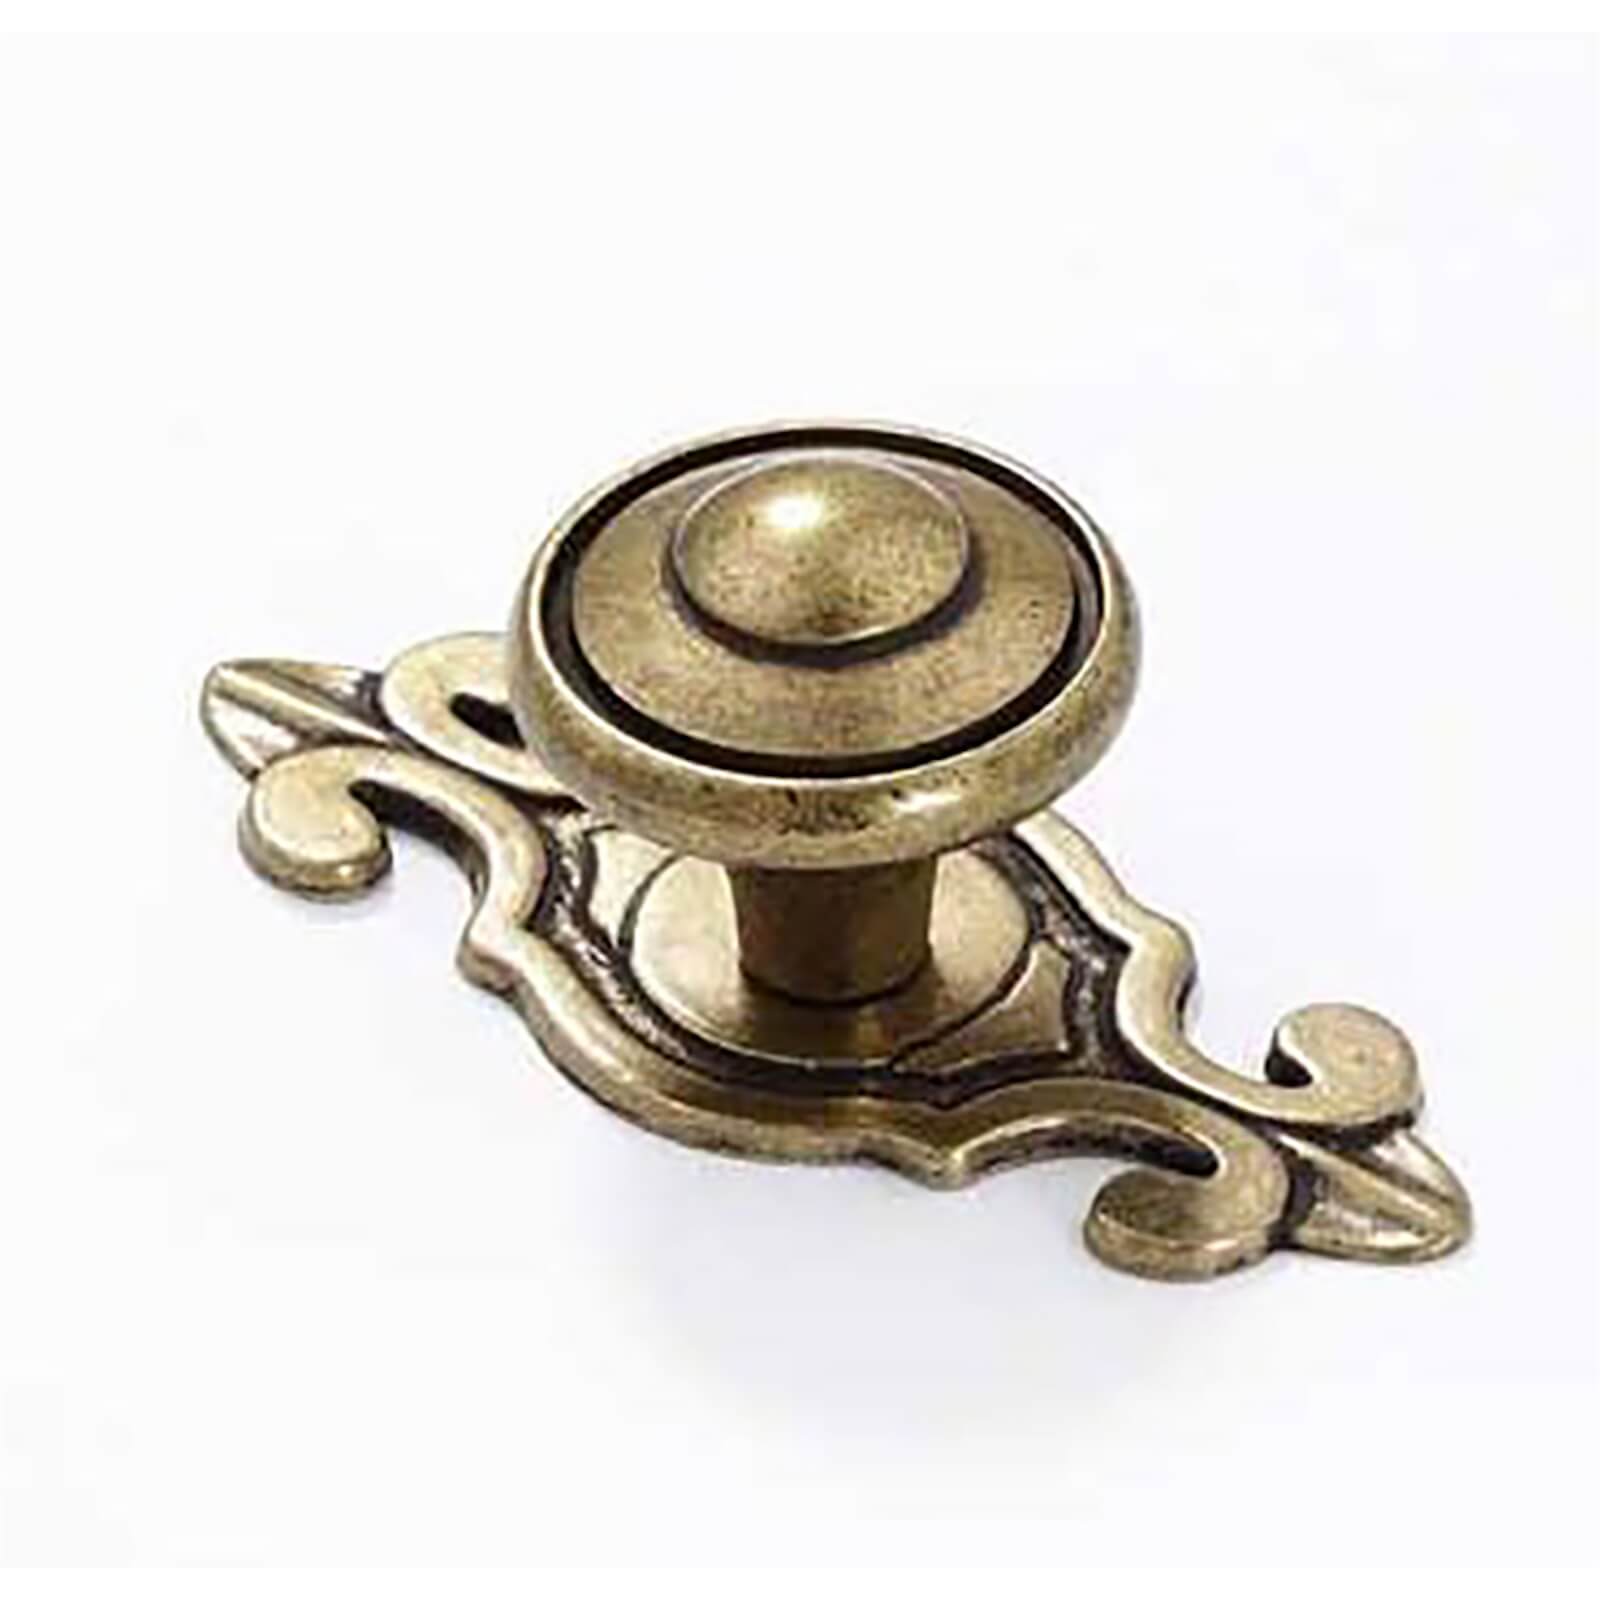 Cabinet Door Knob with Backplate - Antique Brass - 74mm